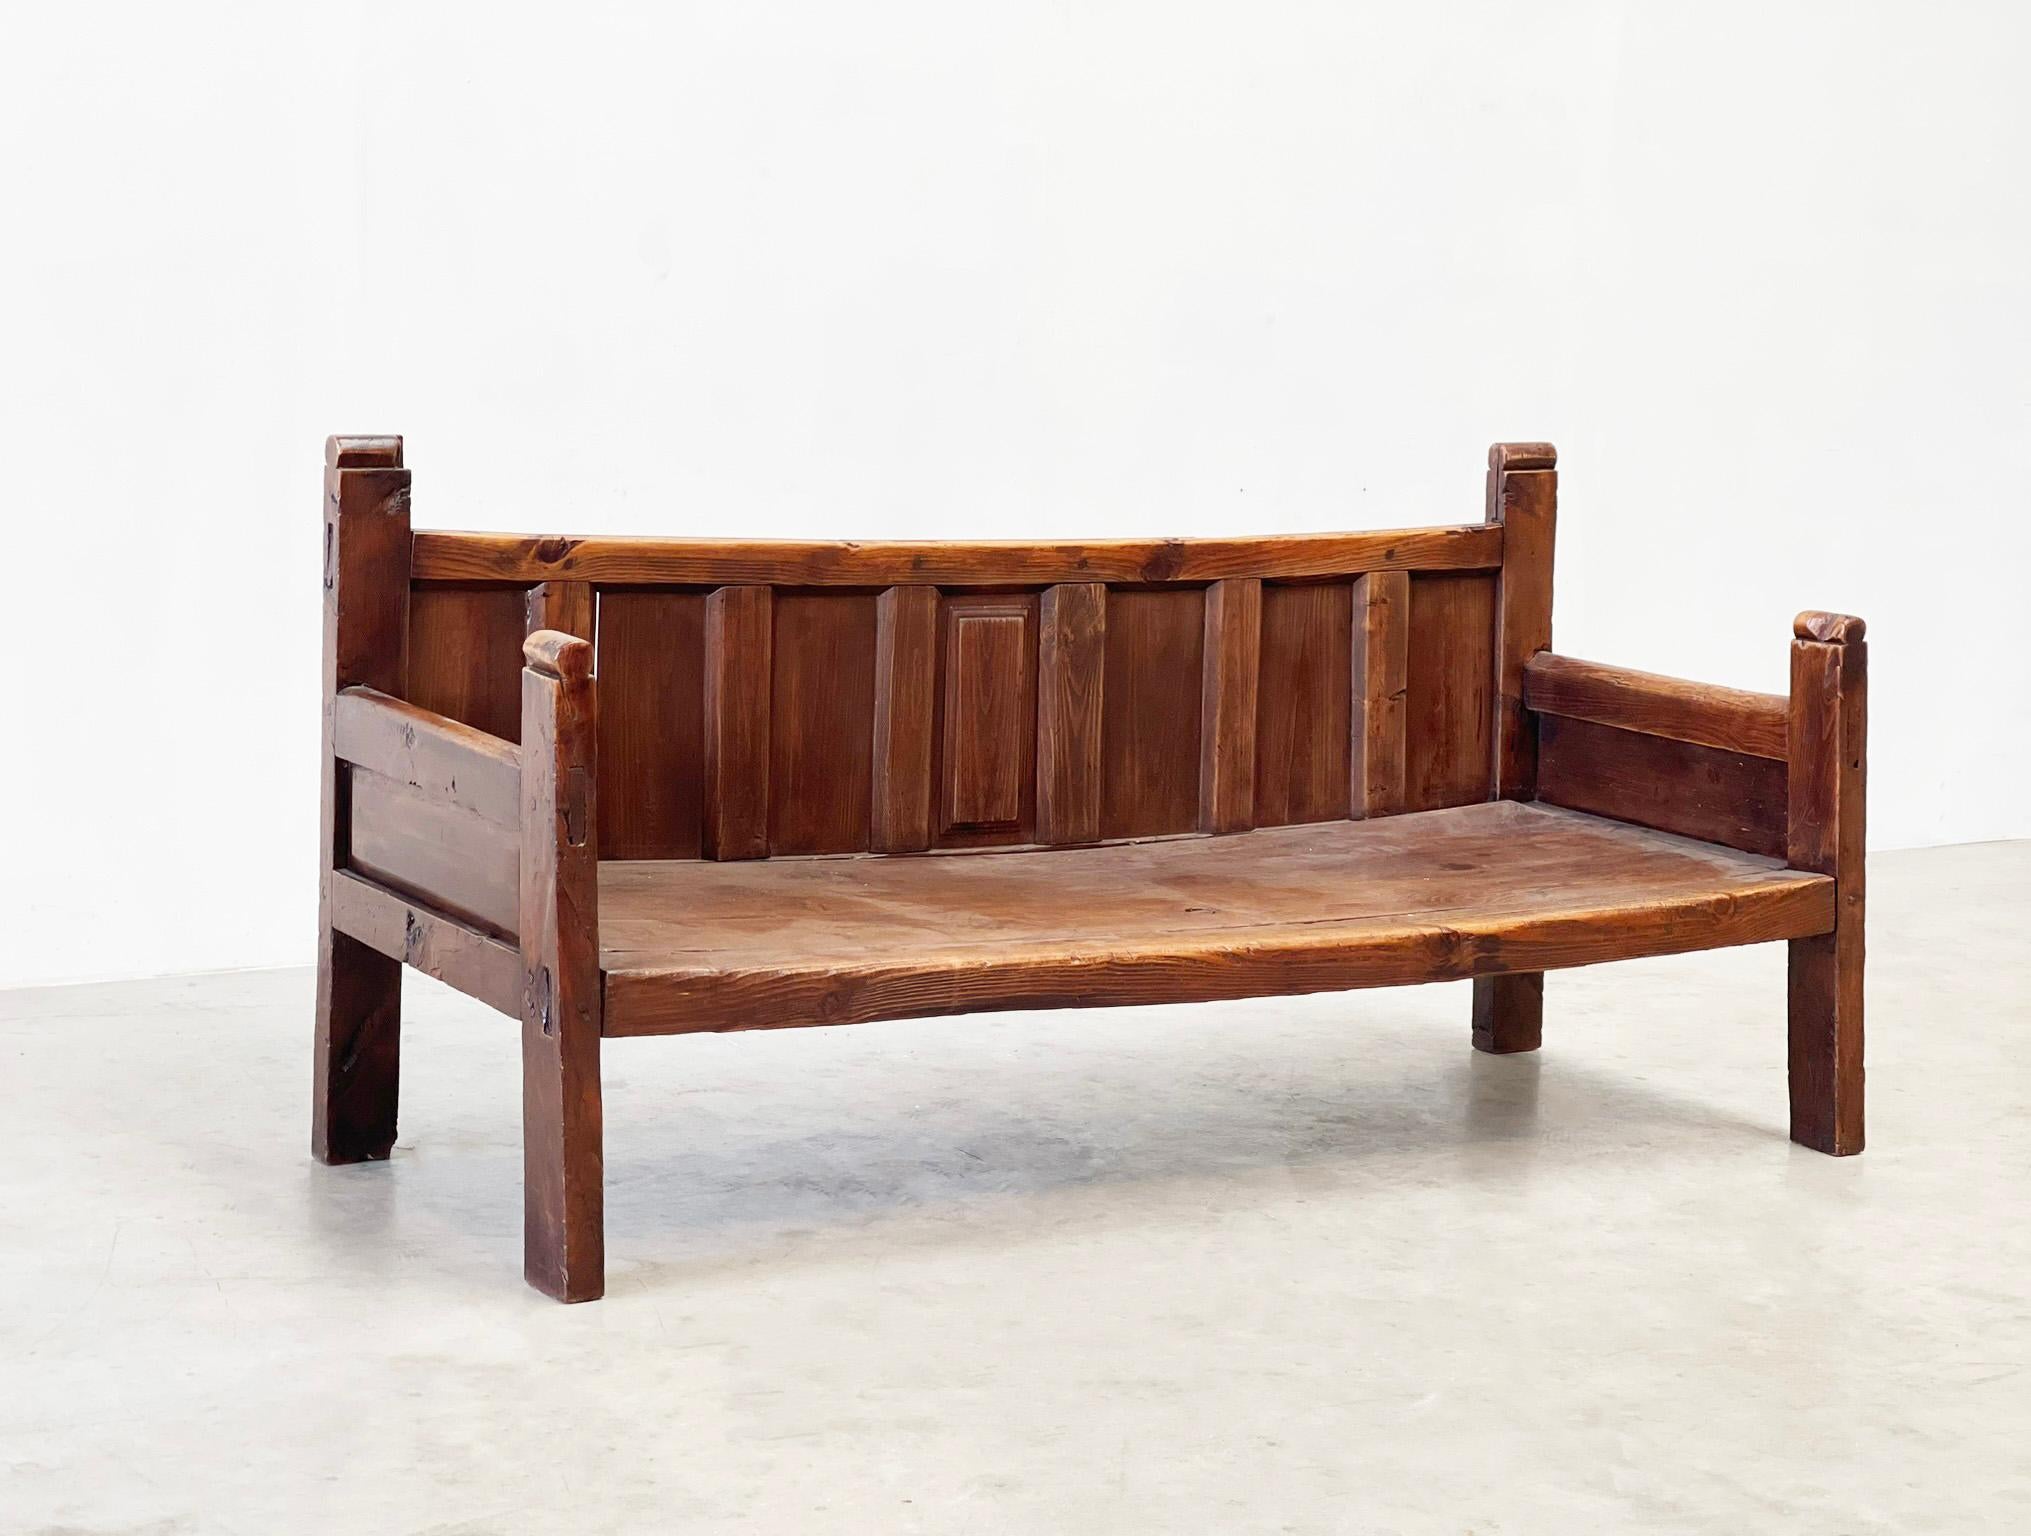 Early 20th century Spanish bench
A style that is becoming more popular and popular. Like this one: rustic early 20th century Spanish furniture. This is a perfect example of that.

This bench was made in Spain in the late 19th century early 20th